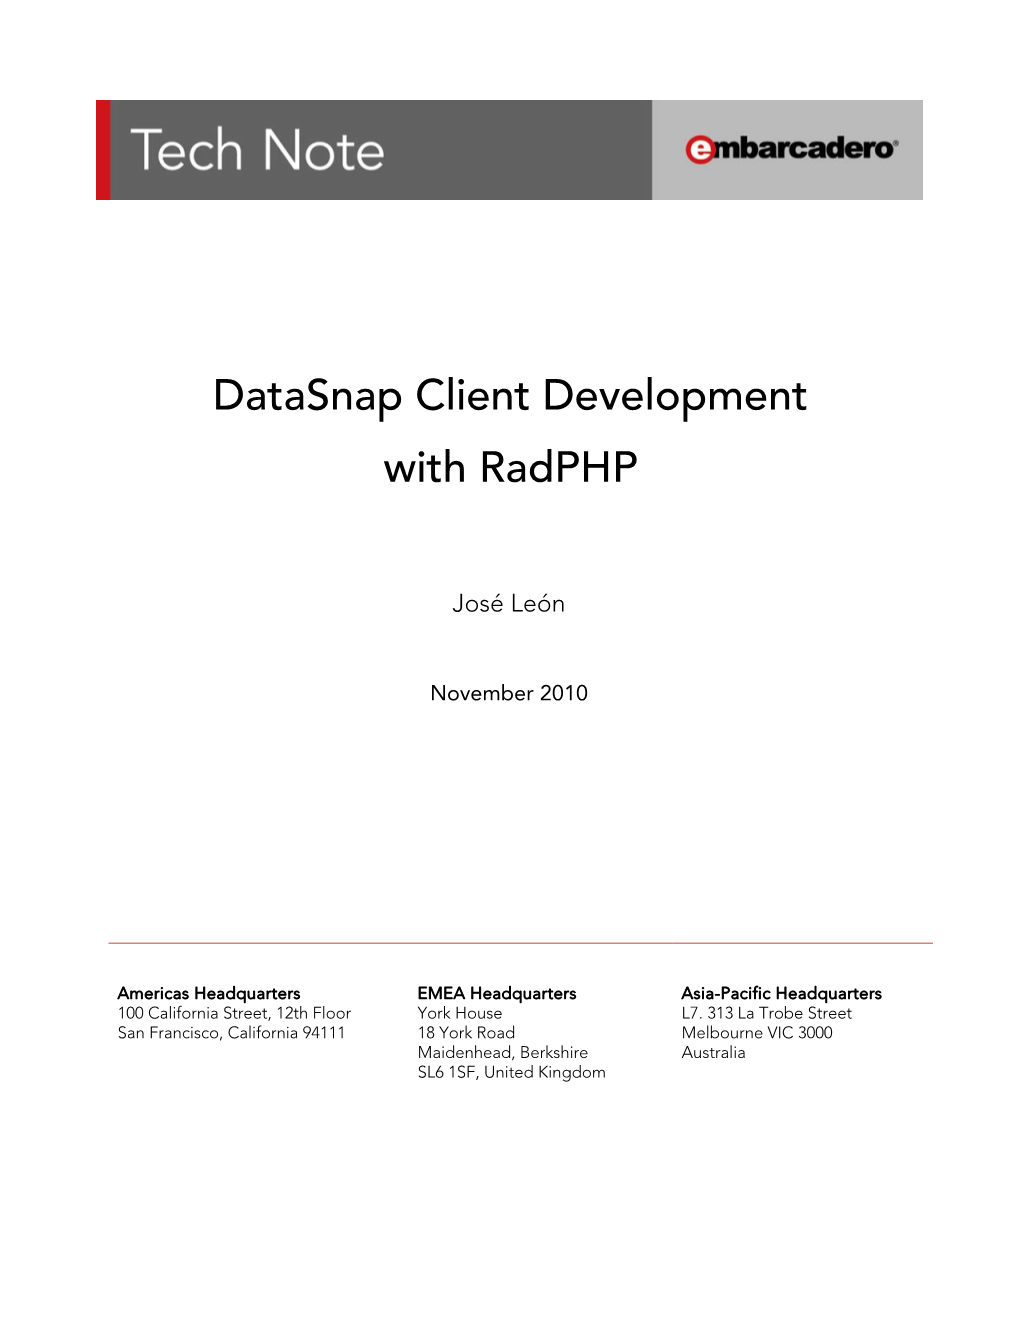 Datasnap Client Development with Radphp